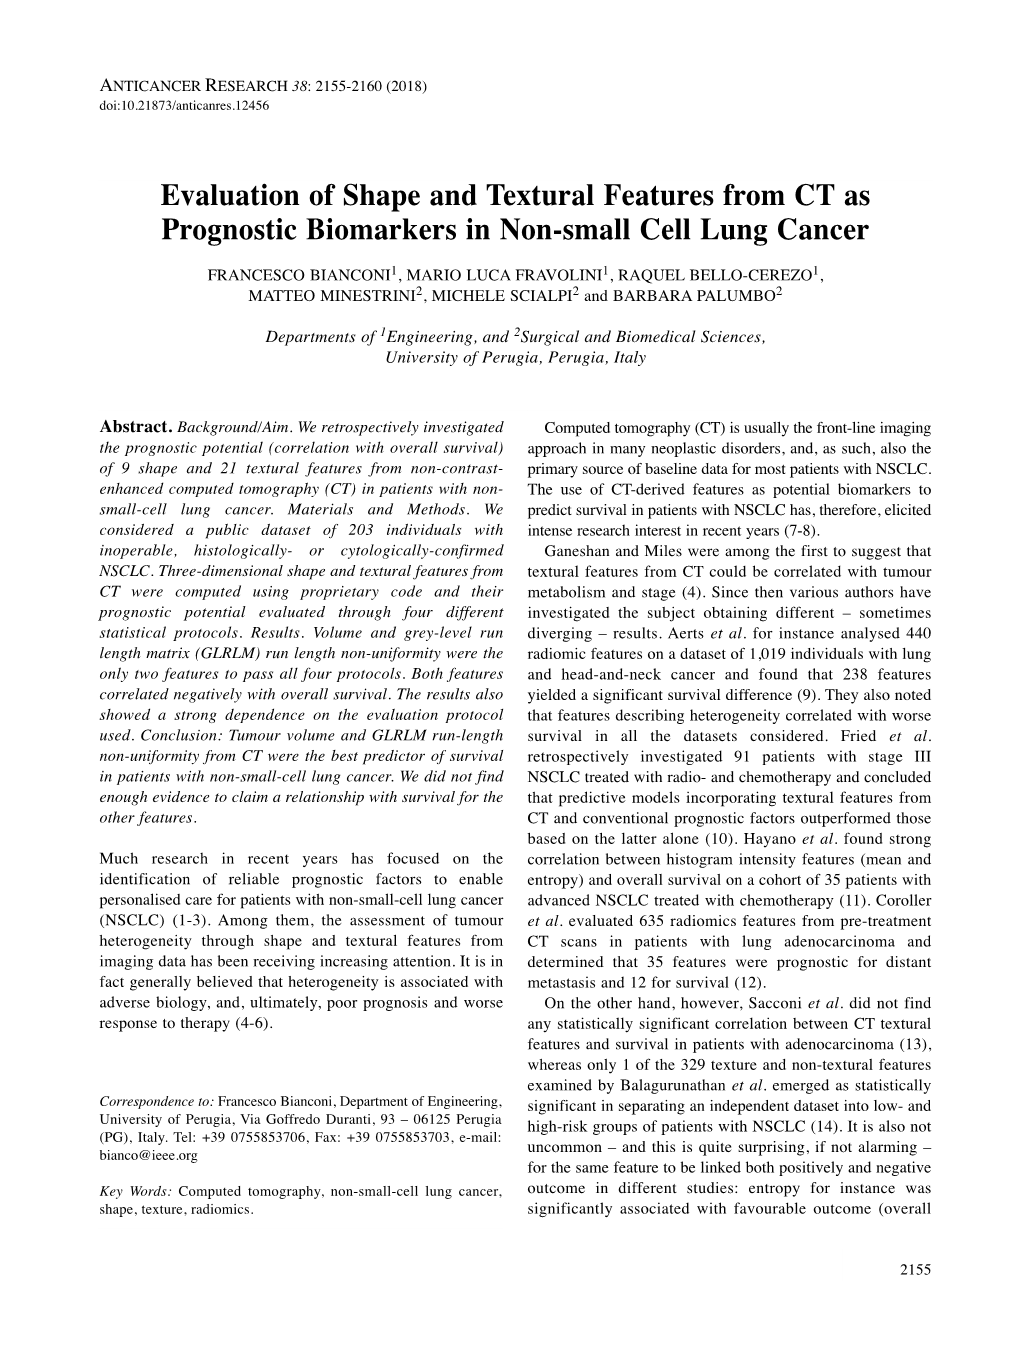 Evaluation of Shape and Textural Features from CT As Prognostic